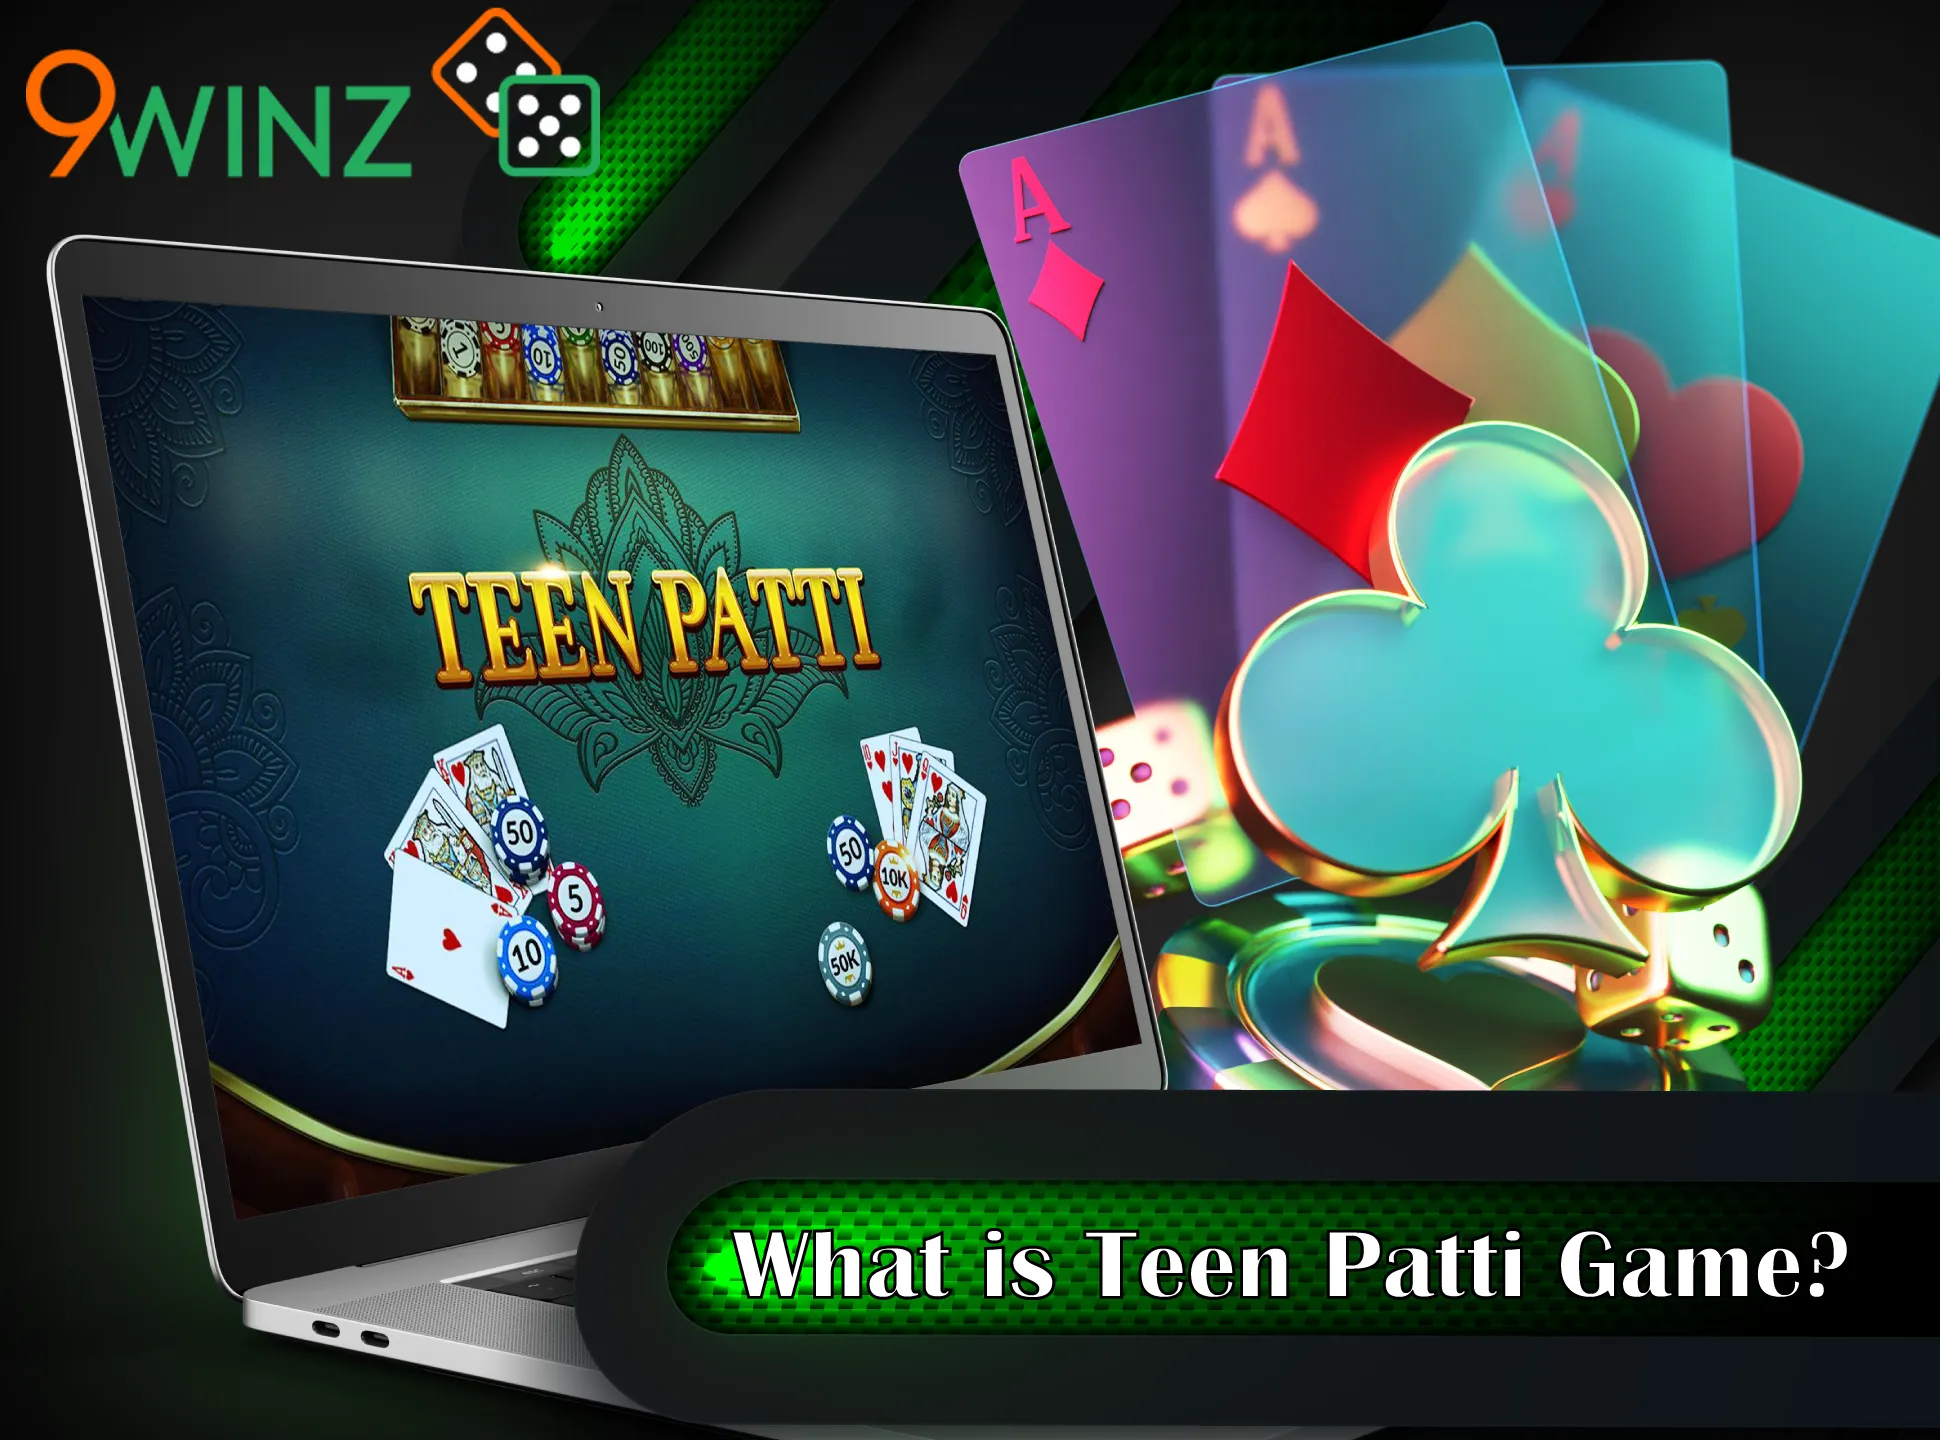 Teen Patti is a card game that is very popular in India.